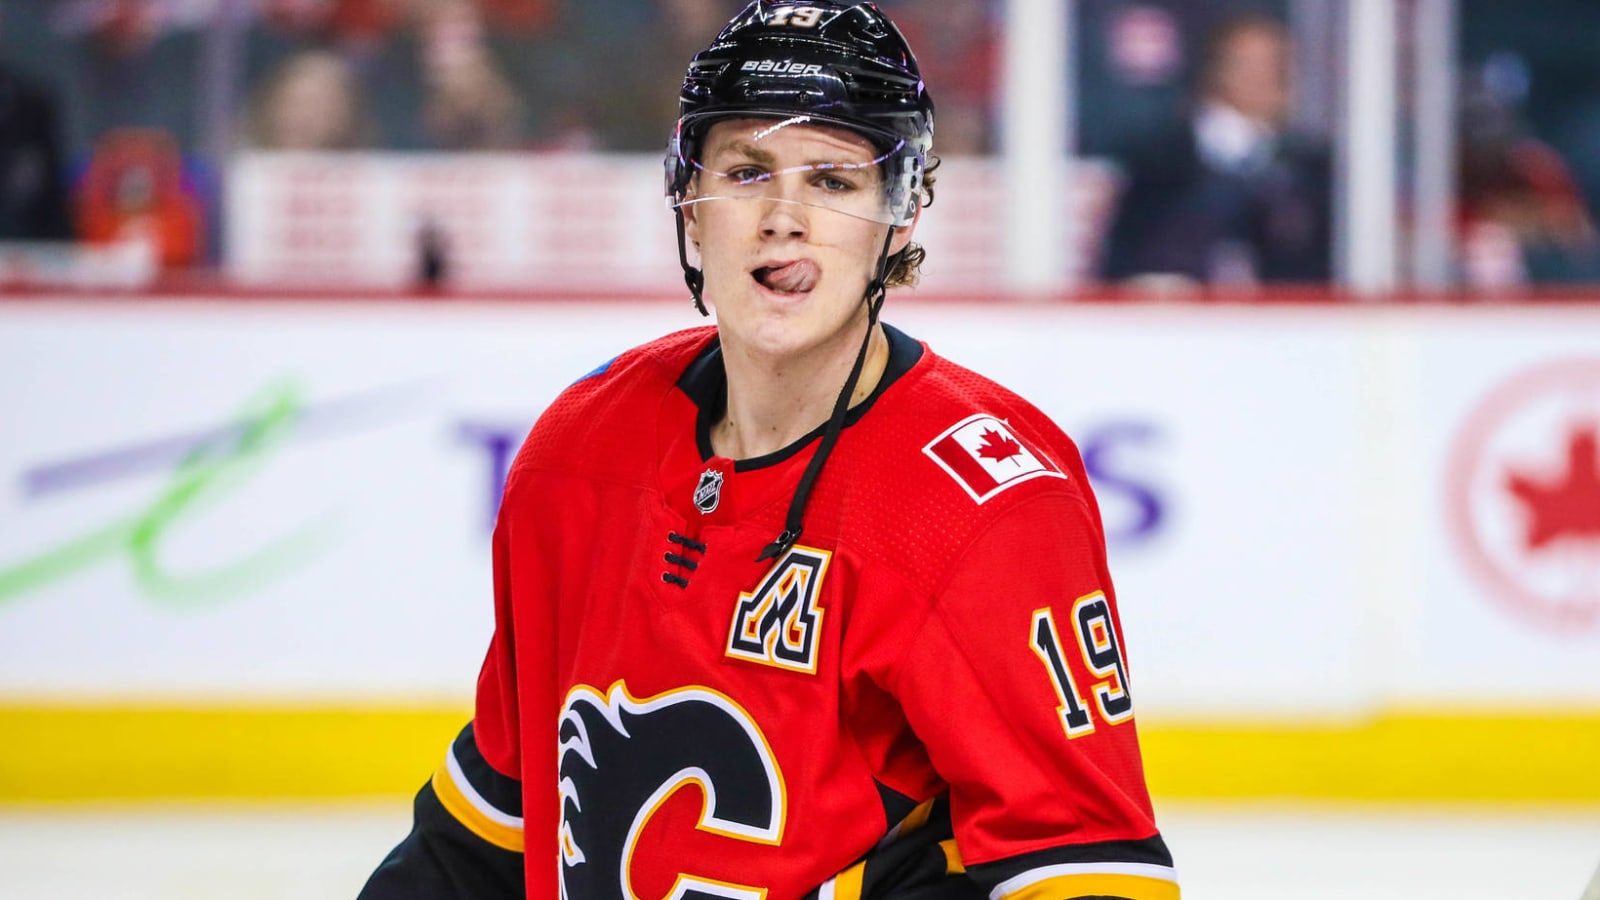 Flames restricted free agent Matthew Tkachuk skating with former OHL team as he awaits new contract